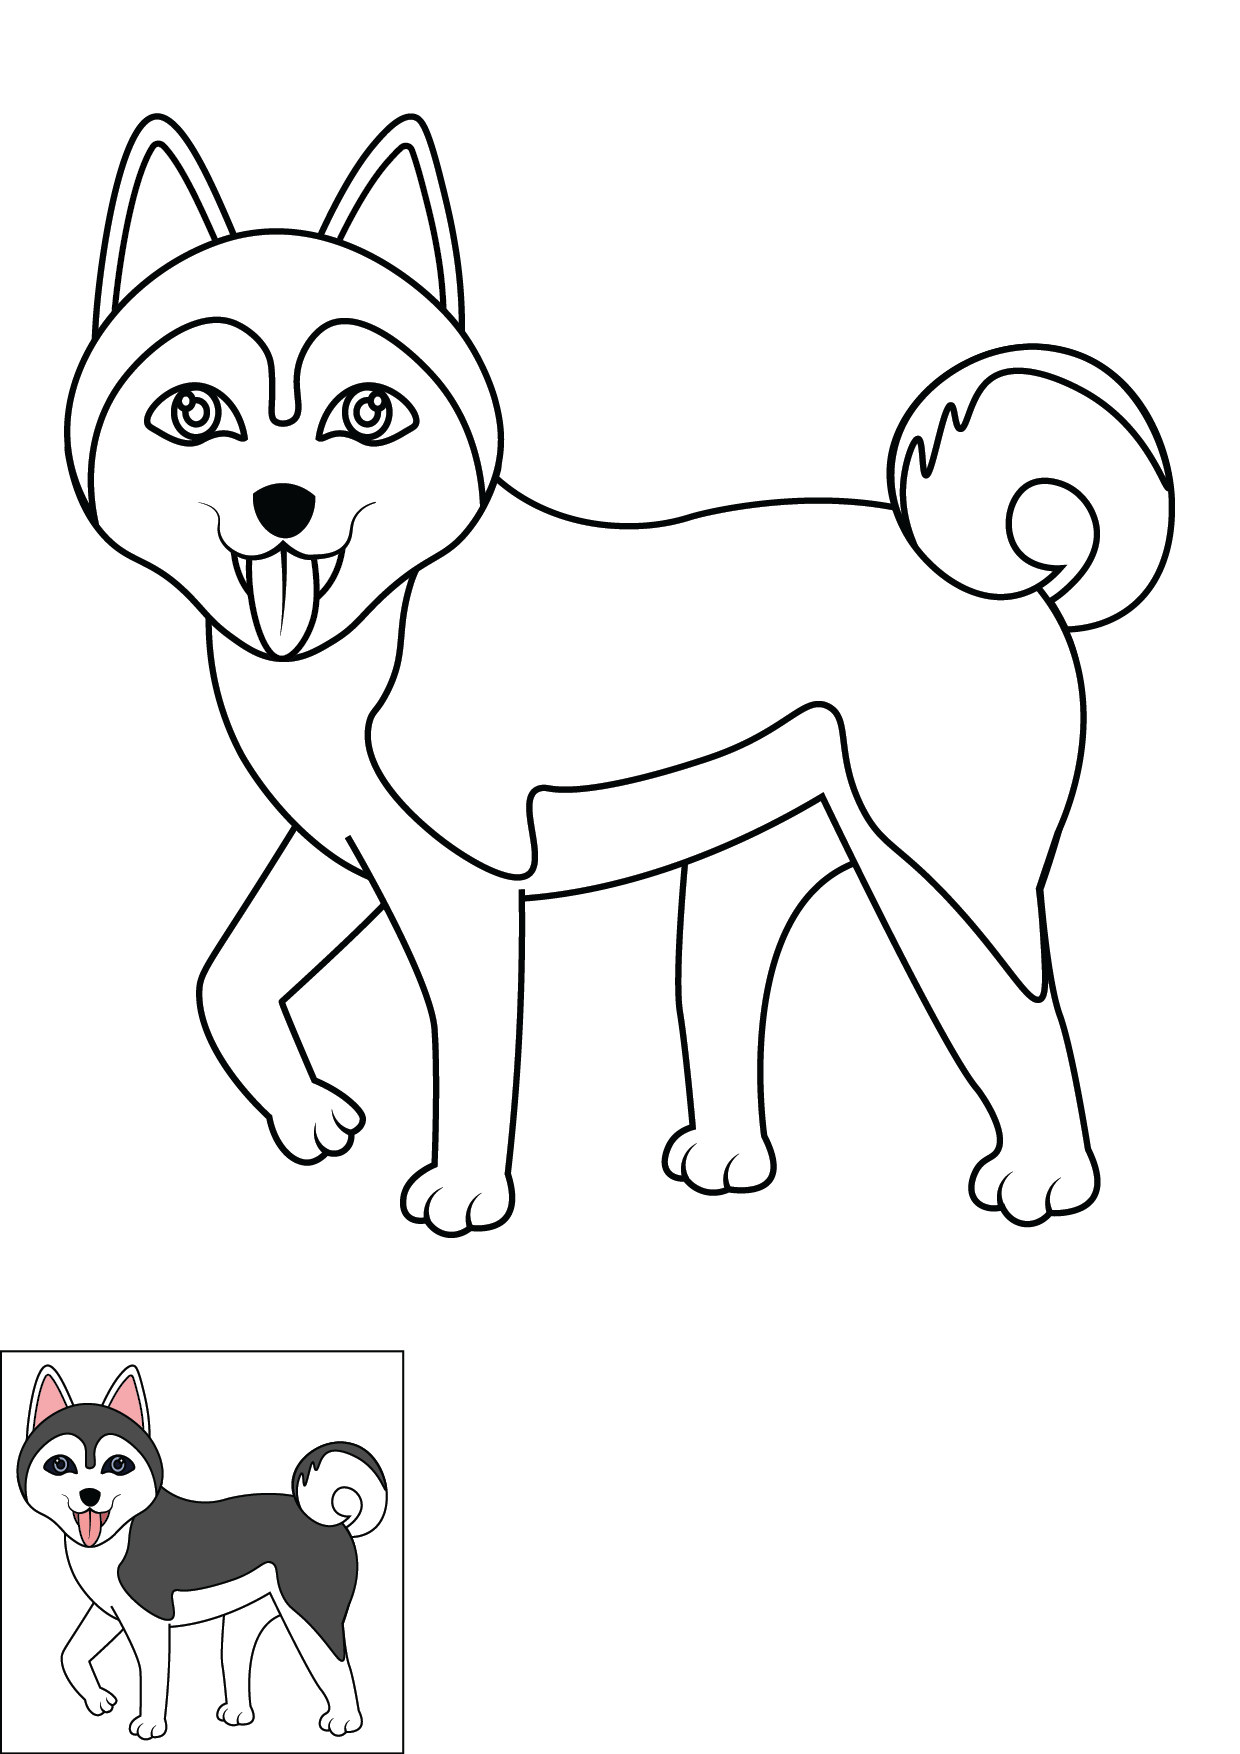 How to Draw A Husky Step by Step Printable Color